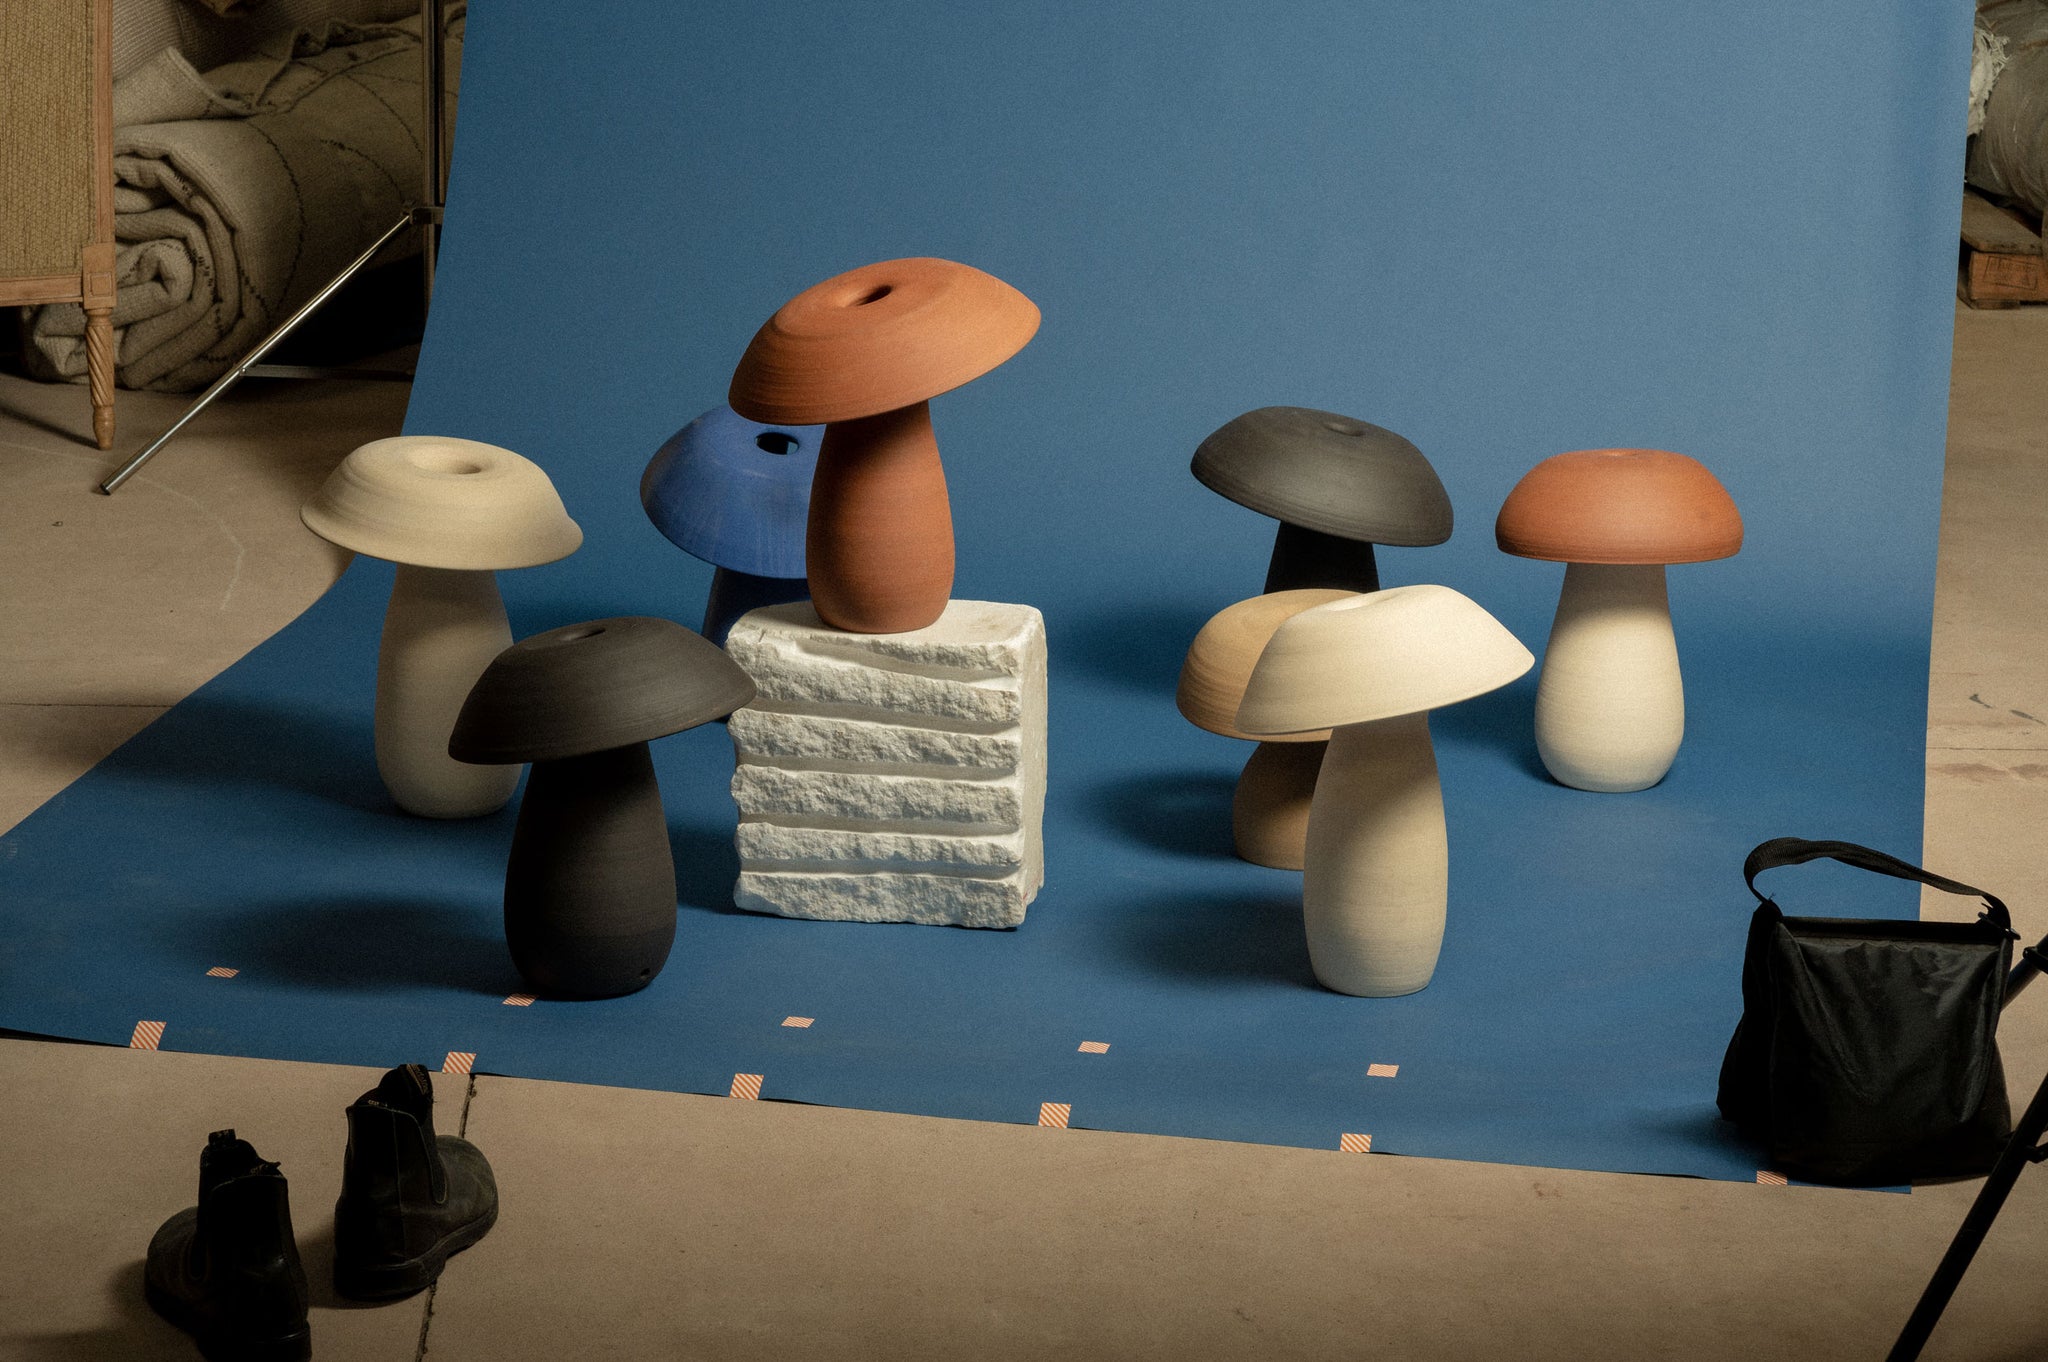 Behind the scenes of shooting the Terracotta, Blue, Black, White, and other variations of the Mushroom Lamp arranged on a blue backdrop